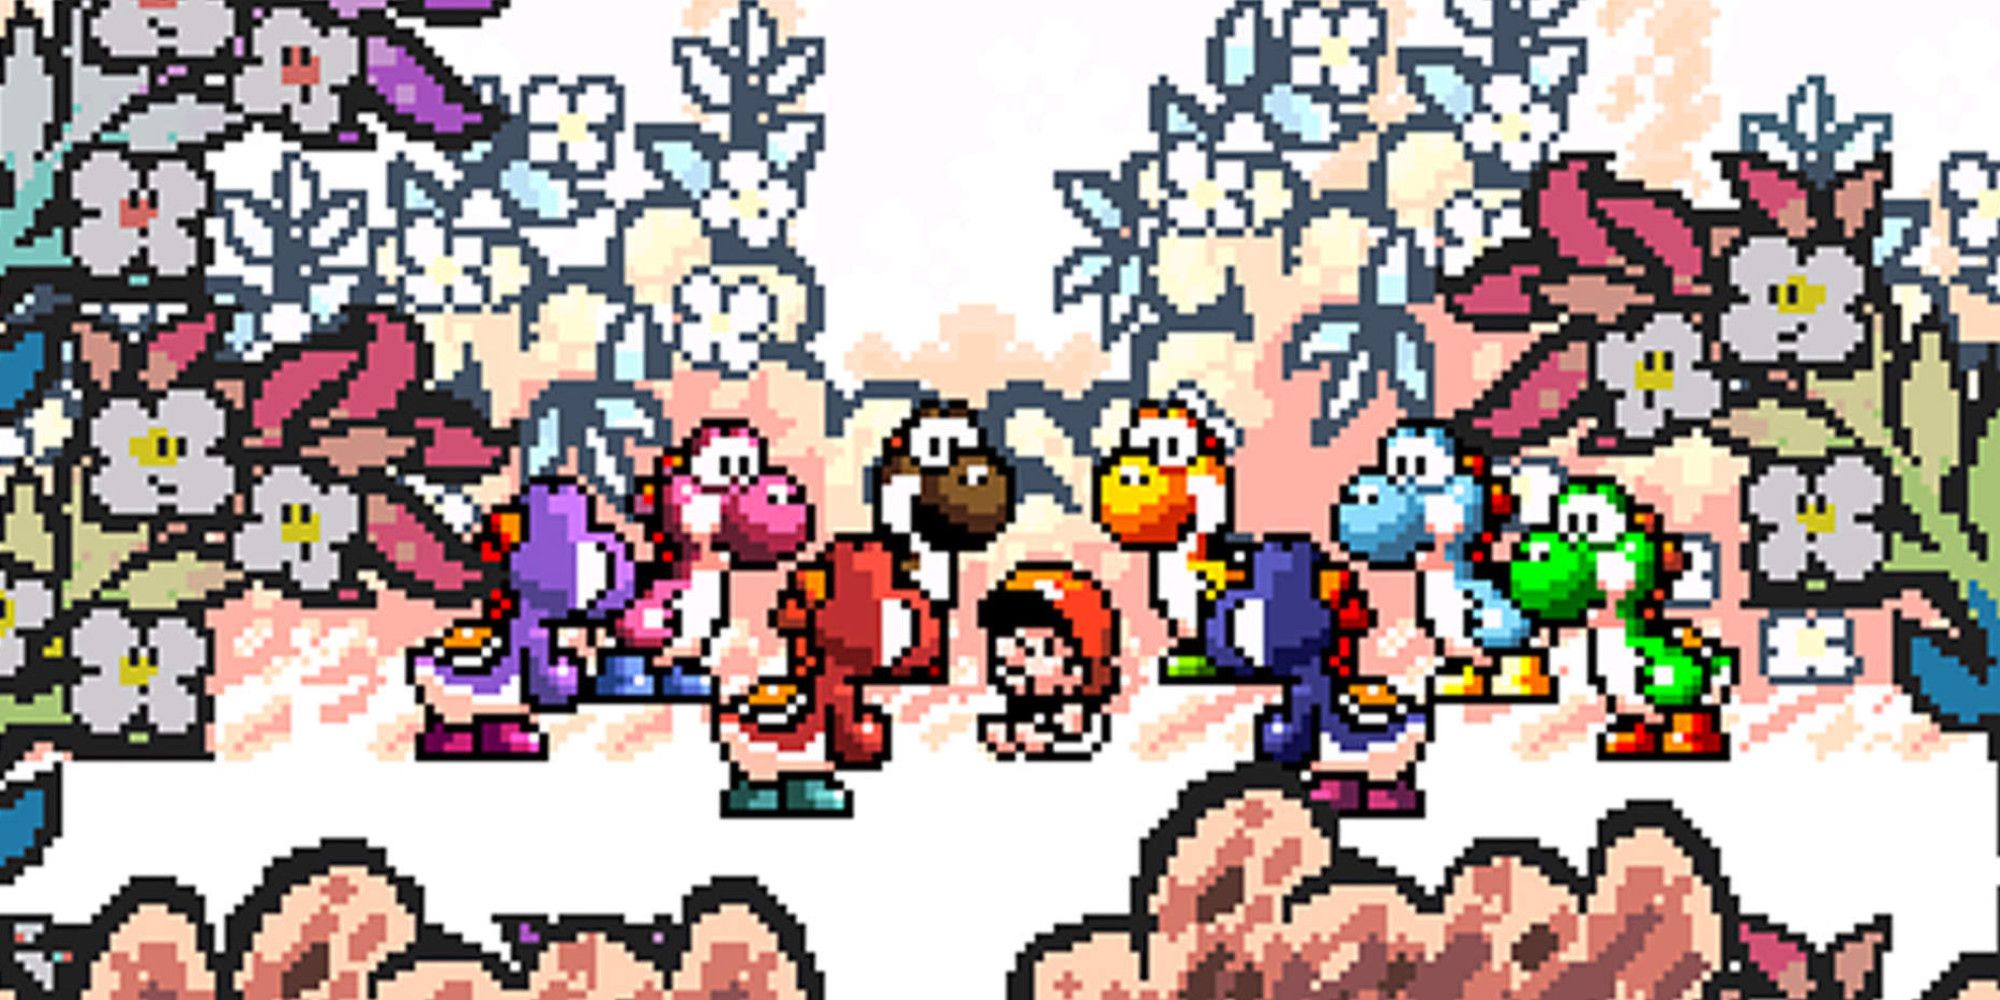 Baby Mario surrounded by Yoshis in Super Mario World 2: Yoshi's Island